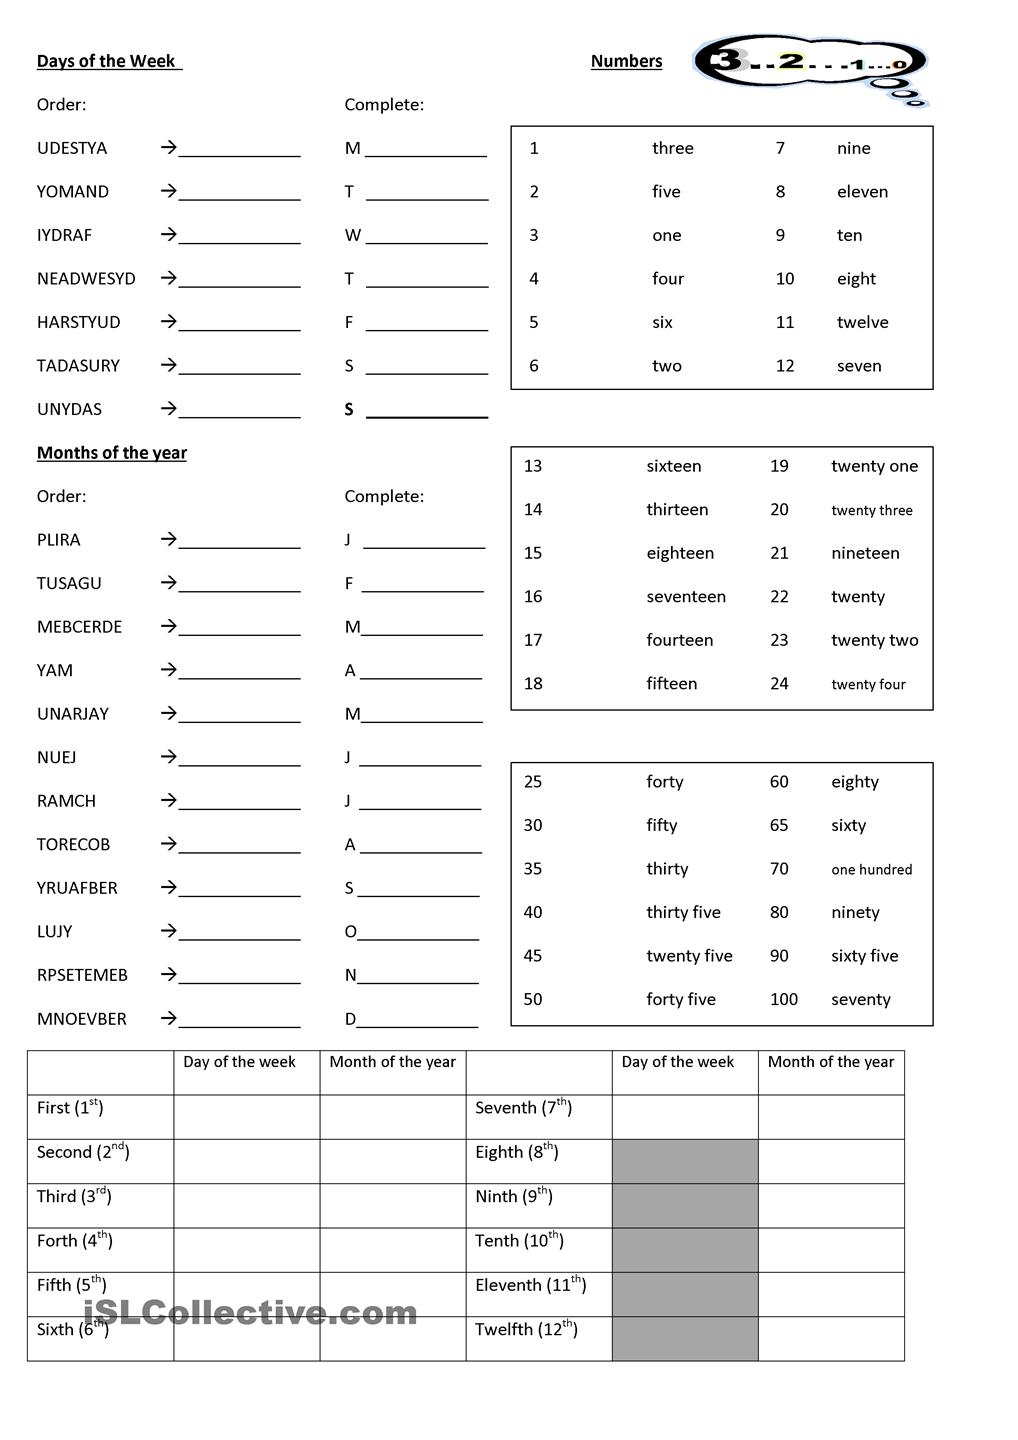 13-best-images-of-days-of-the-week-spanish-and-english-worksheets-spanish-ordinal-numbers